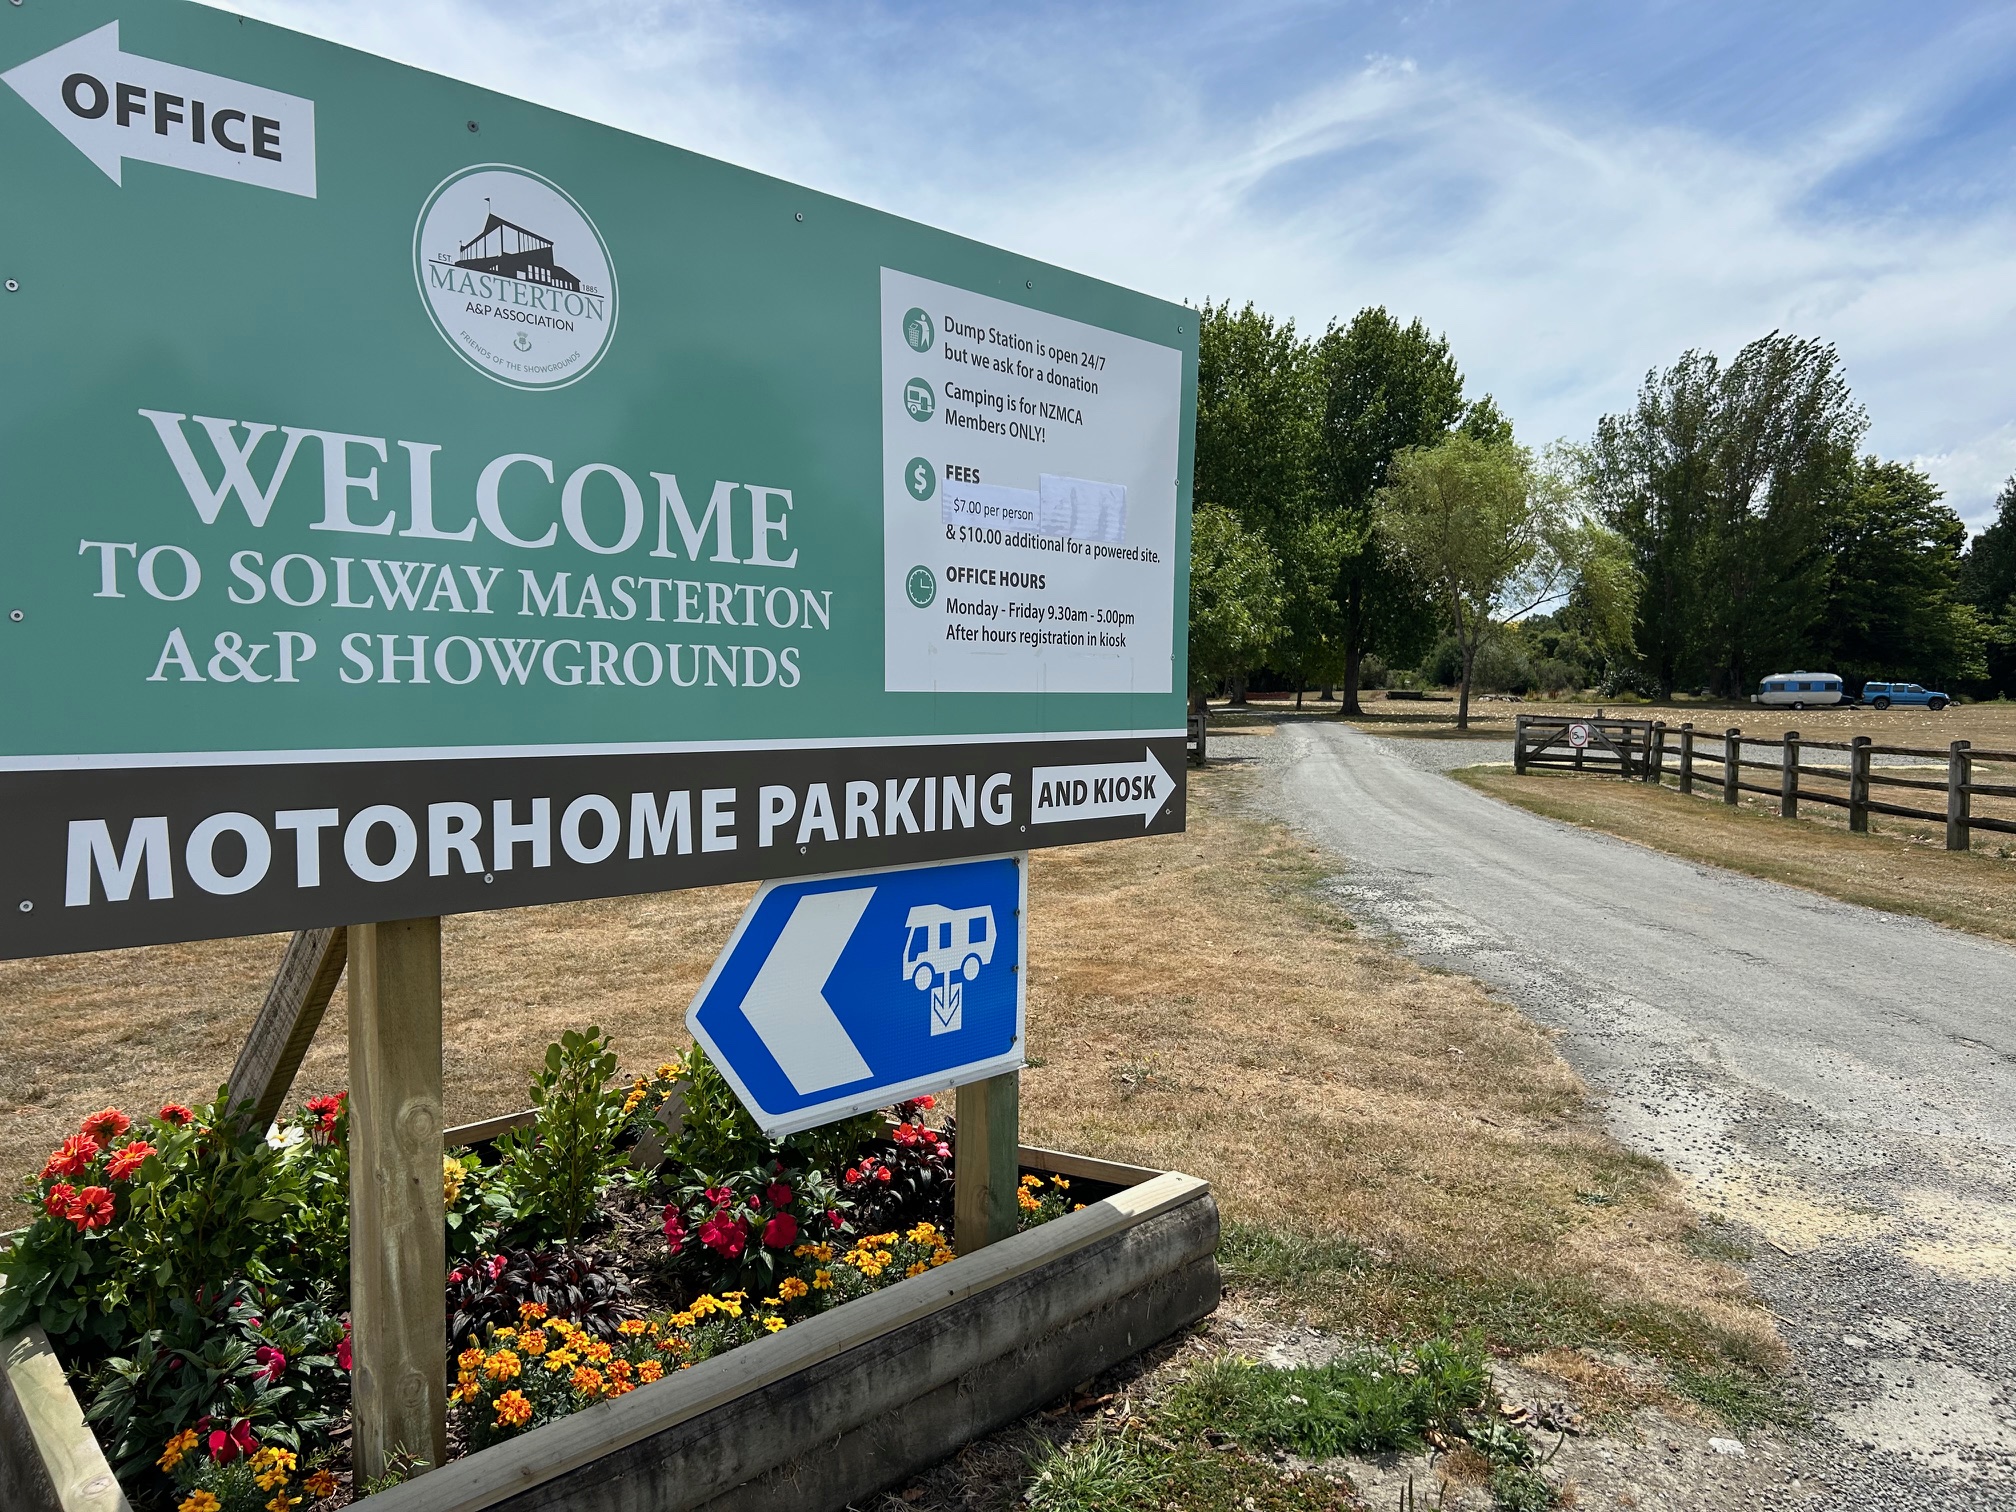 Image of the entrance and motorhome parking sign